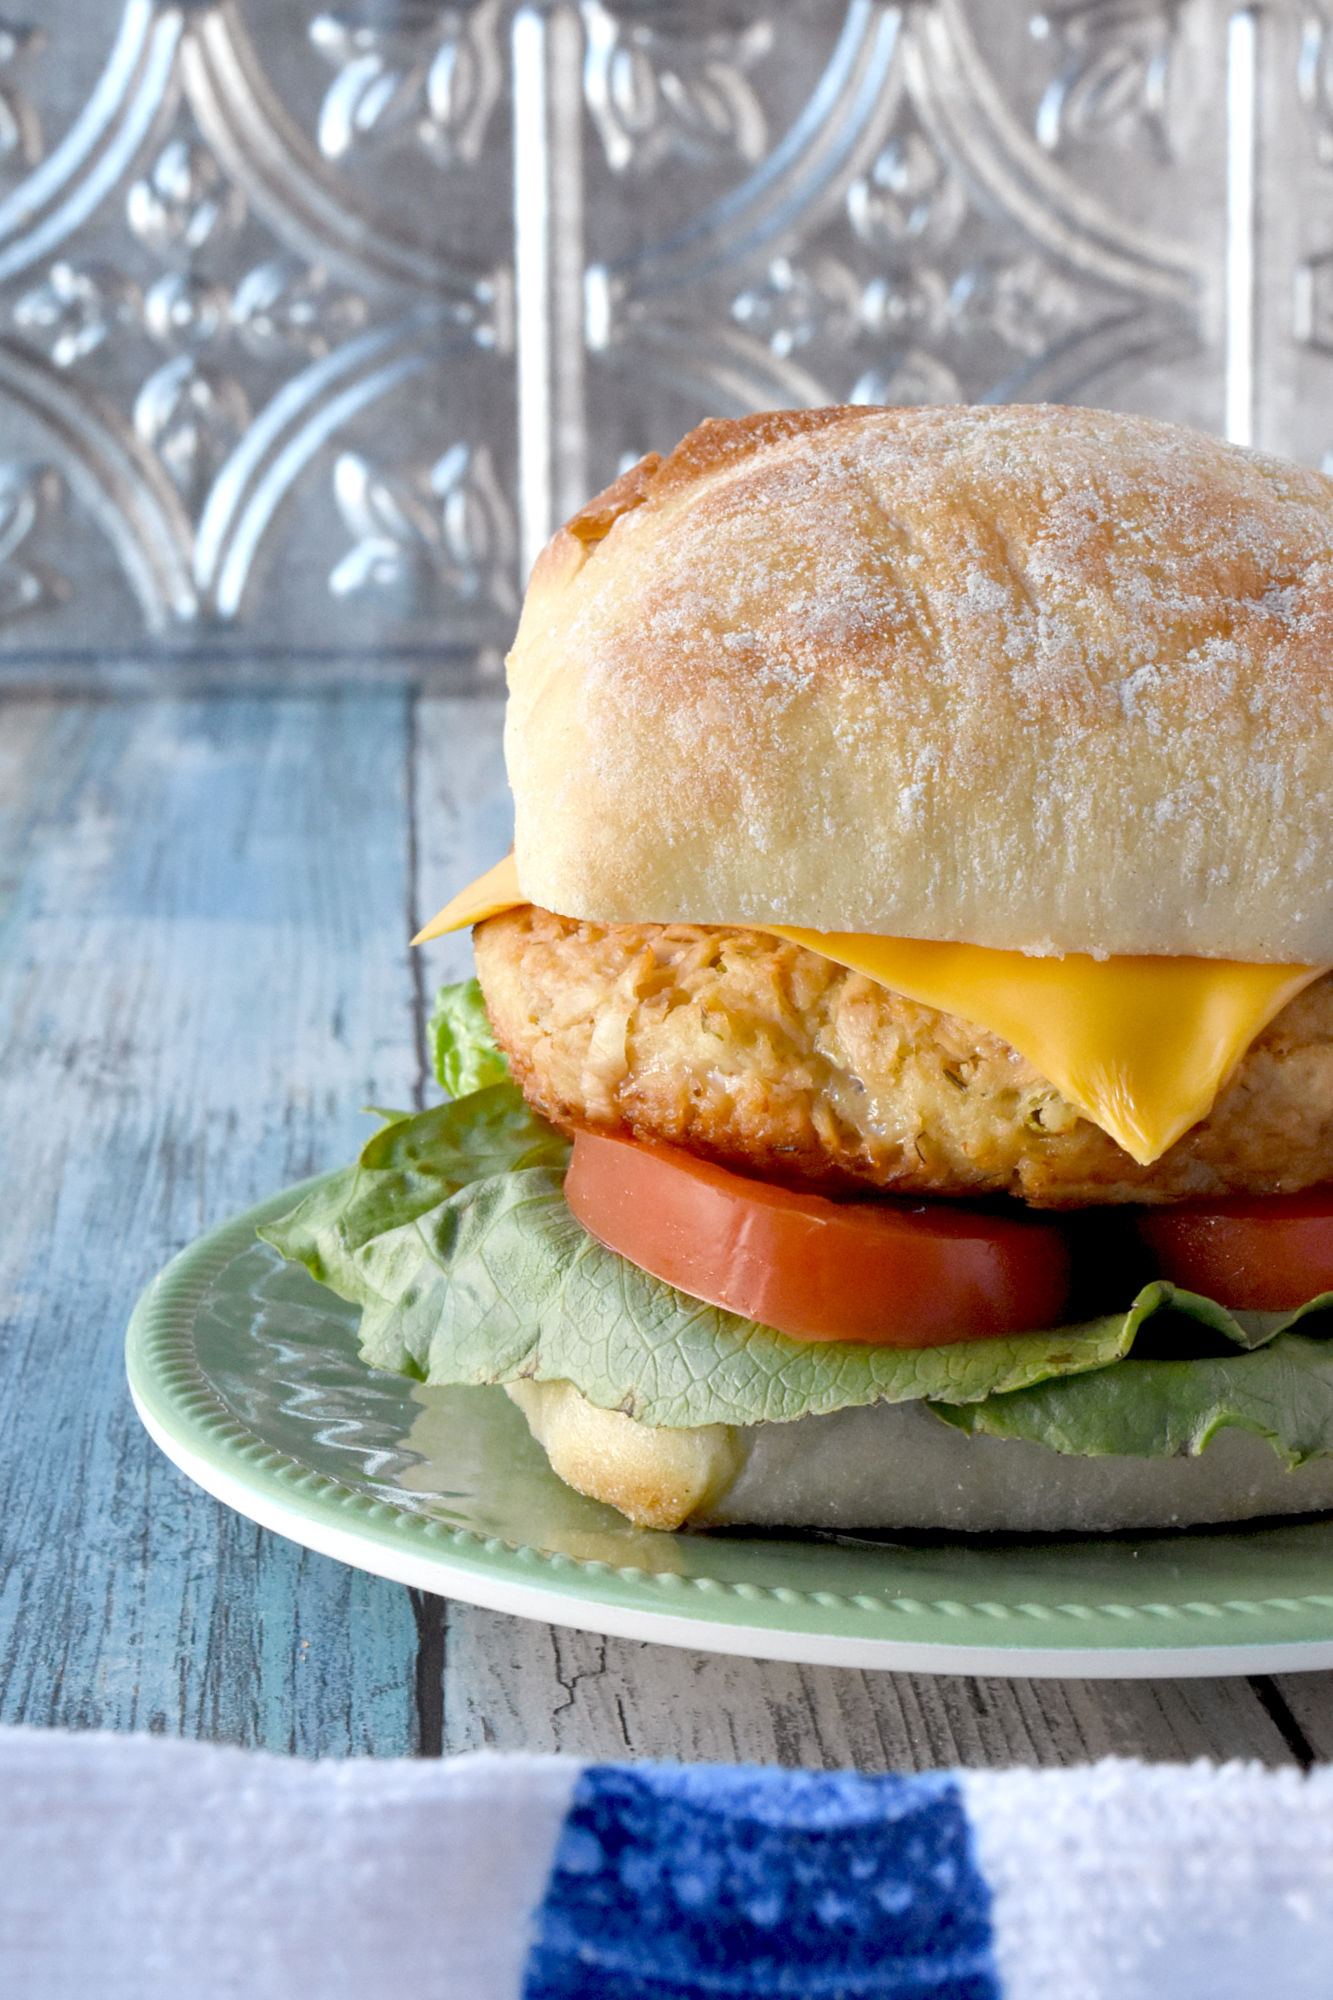 Southern Salmon Patty Sandwiches take delicious salmon patties and turns them into a fun sandwich for your family. It’s also a budget friendly meal for your family.  #OurFamilyTable #budgetfriendly #pantryrecipe #easyrecipe